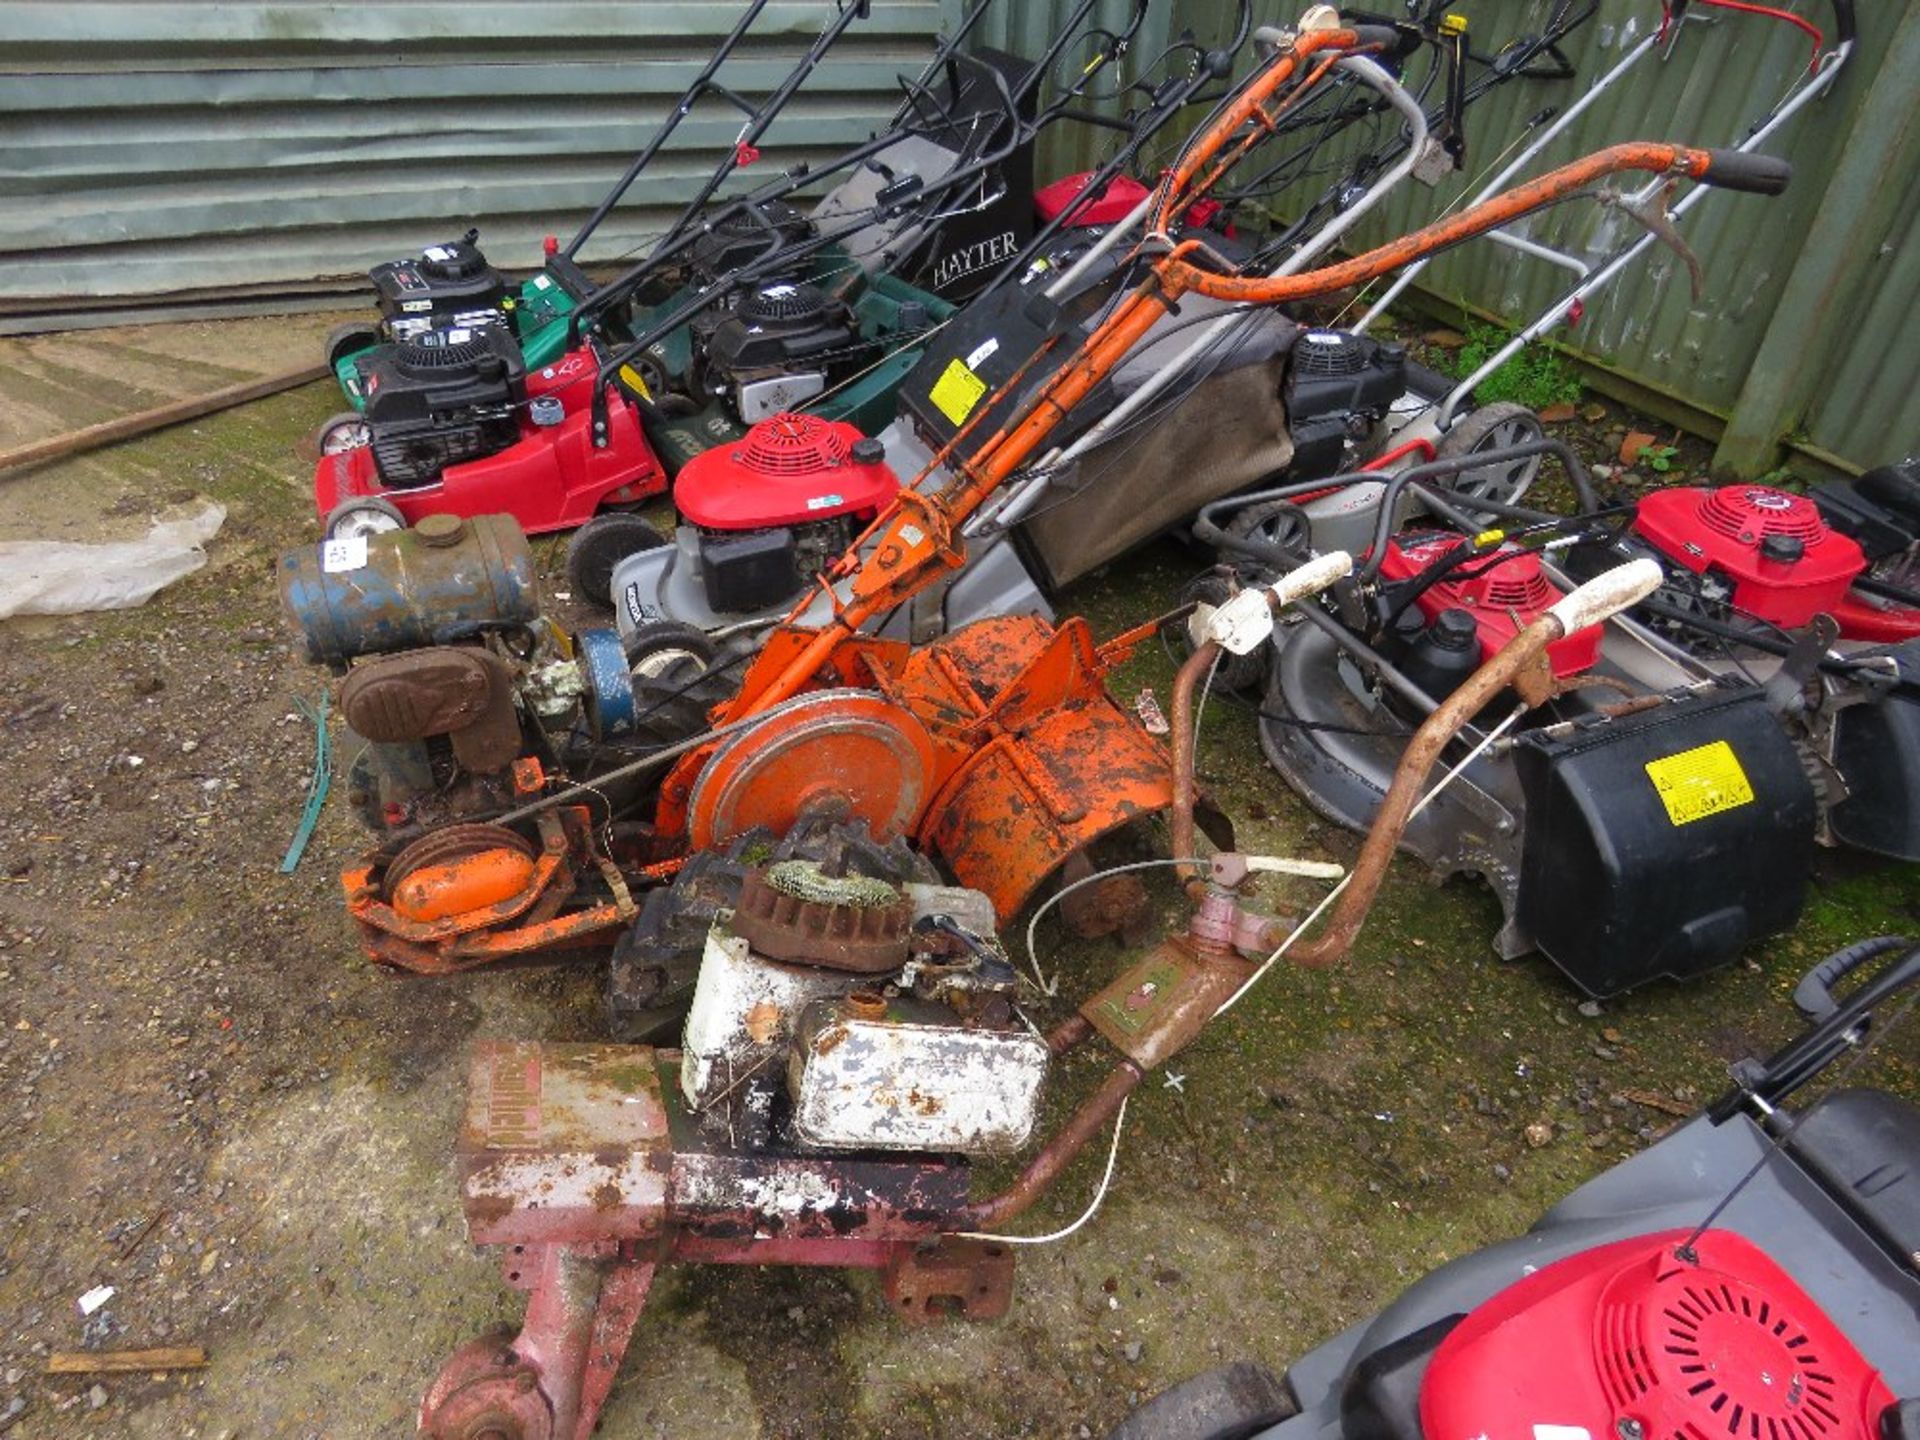 HOWARD 300 PETROL ROTORVATOR PLUS A MOUNTFIELD CHASSIS....THIS LOT IS SOLD UNDER THE AUCTIONEERS MAR - Bild 2 aus 8